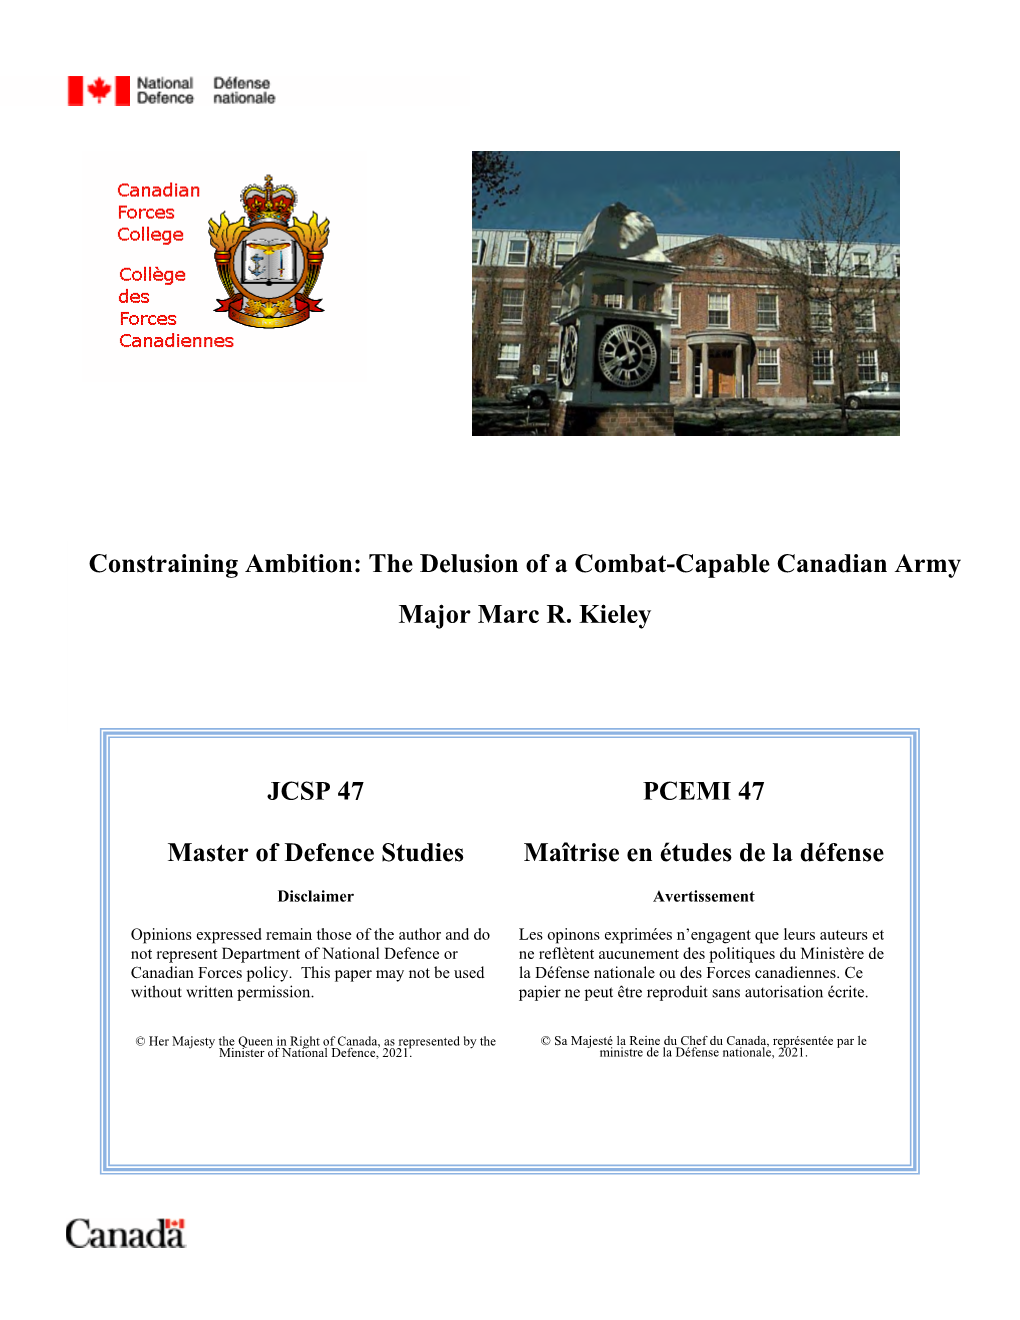 Constraining Ambition: the Delusion of a Combat-Capable Canadian Army Major Marc R